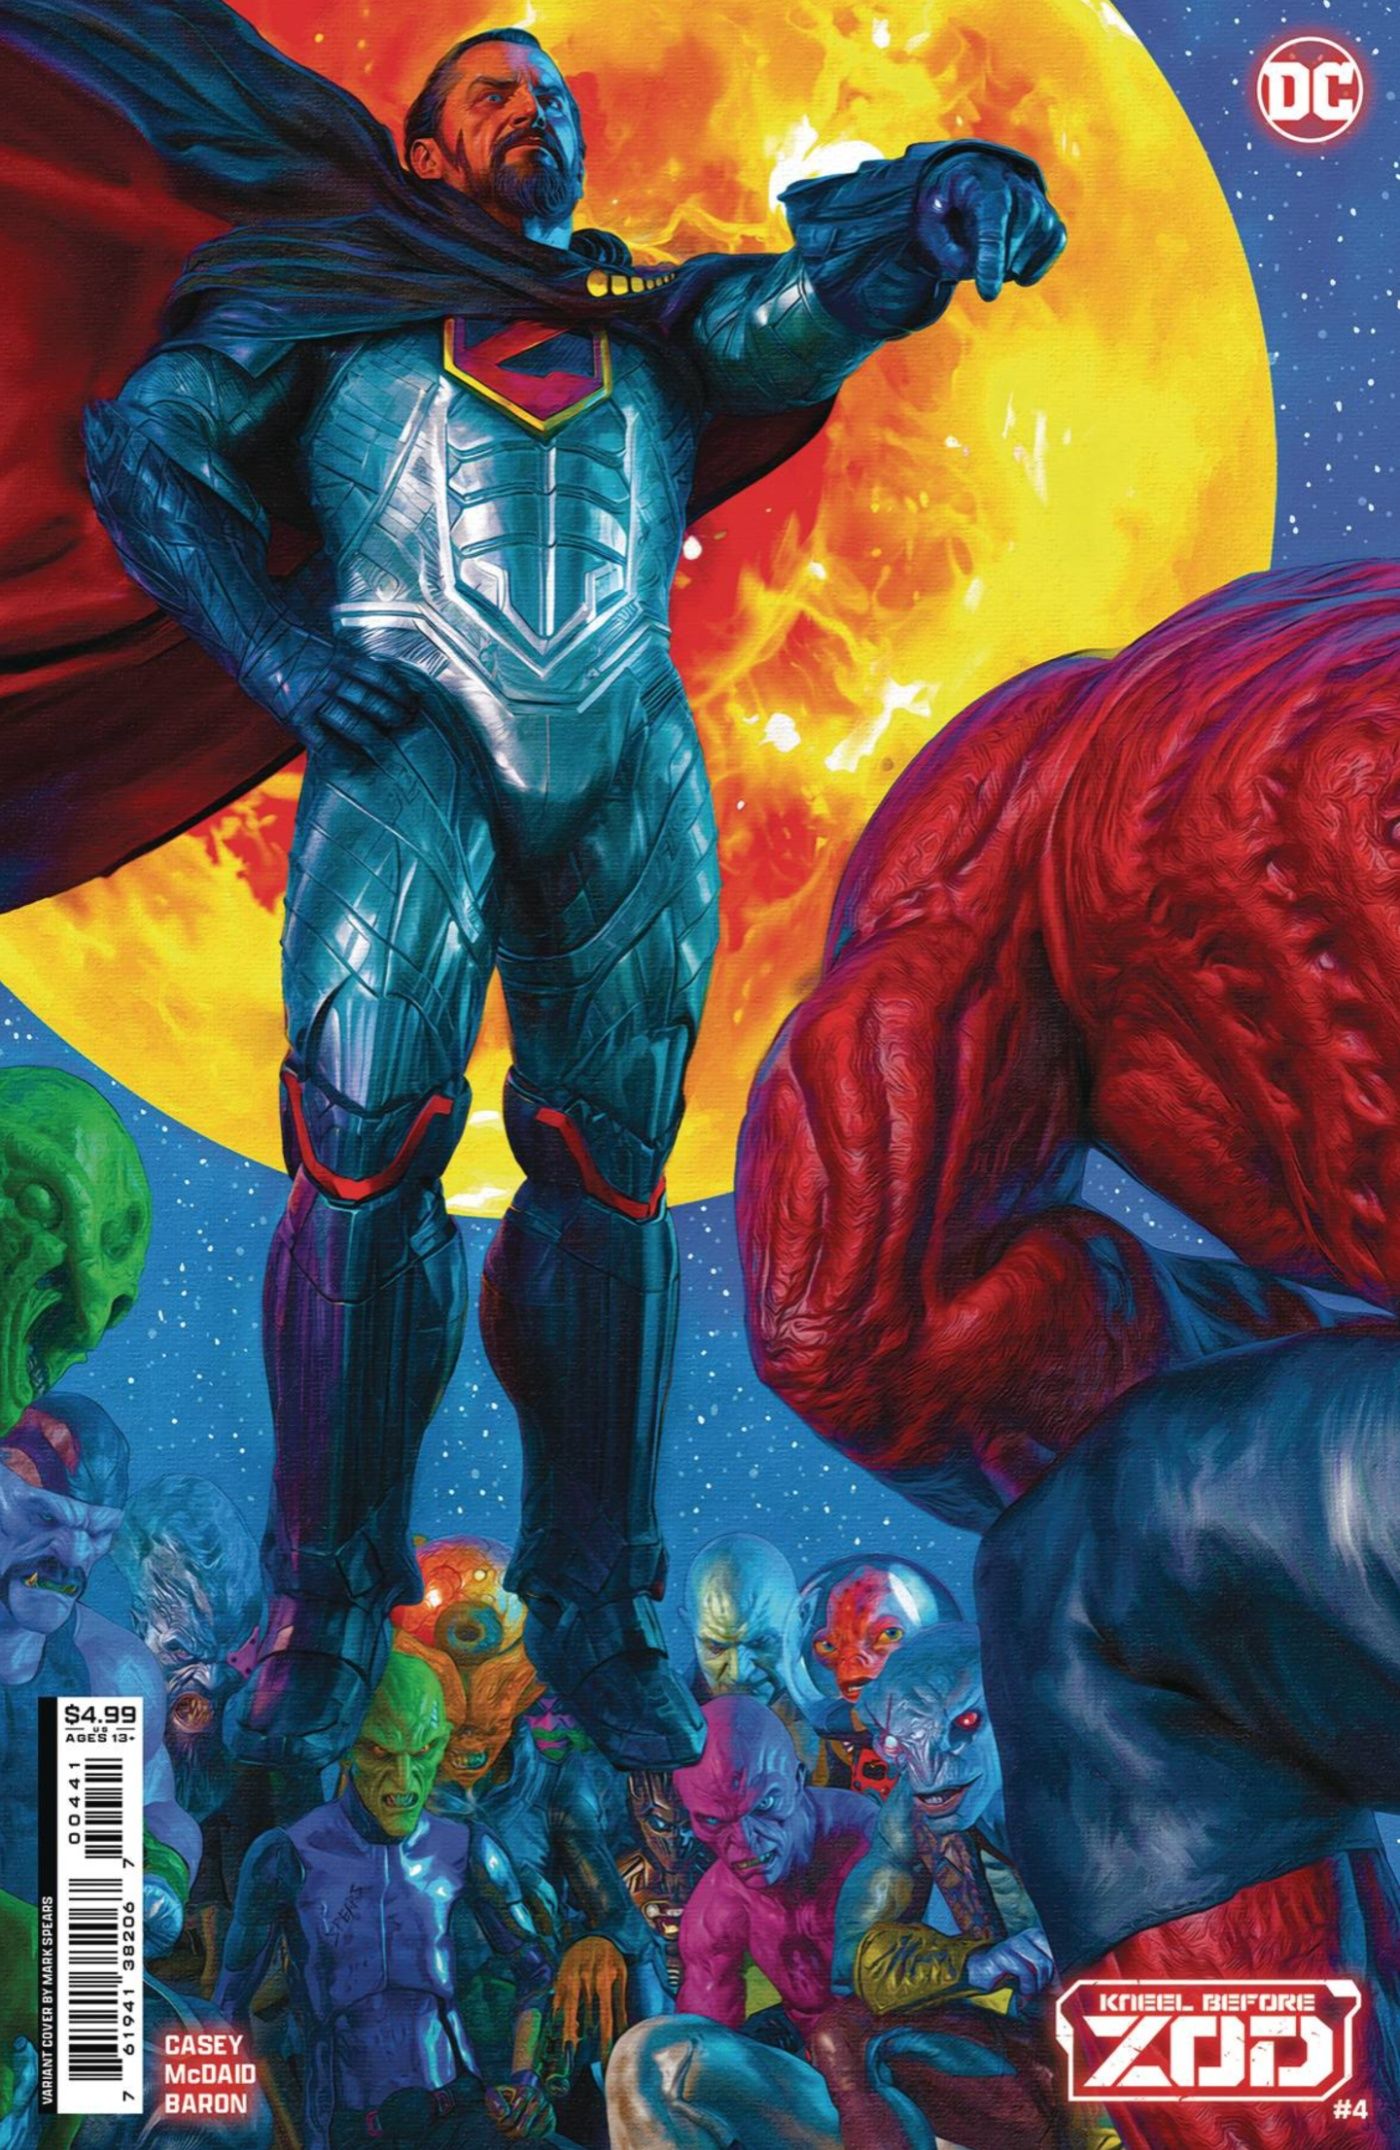 Superman Lore Gets Twisted, As The Bottle City of Kandor Takes a Dark New Form